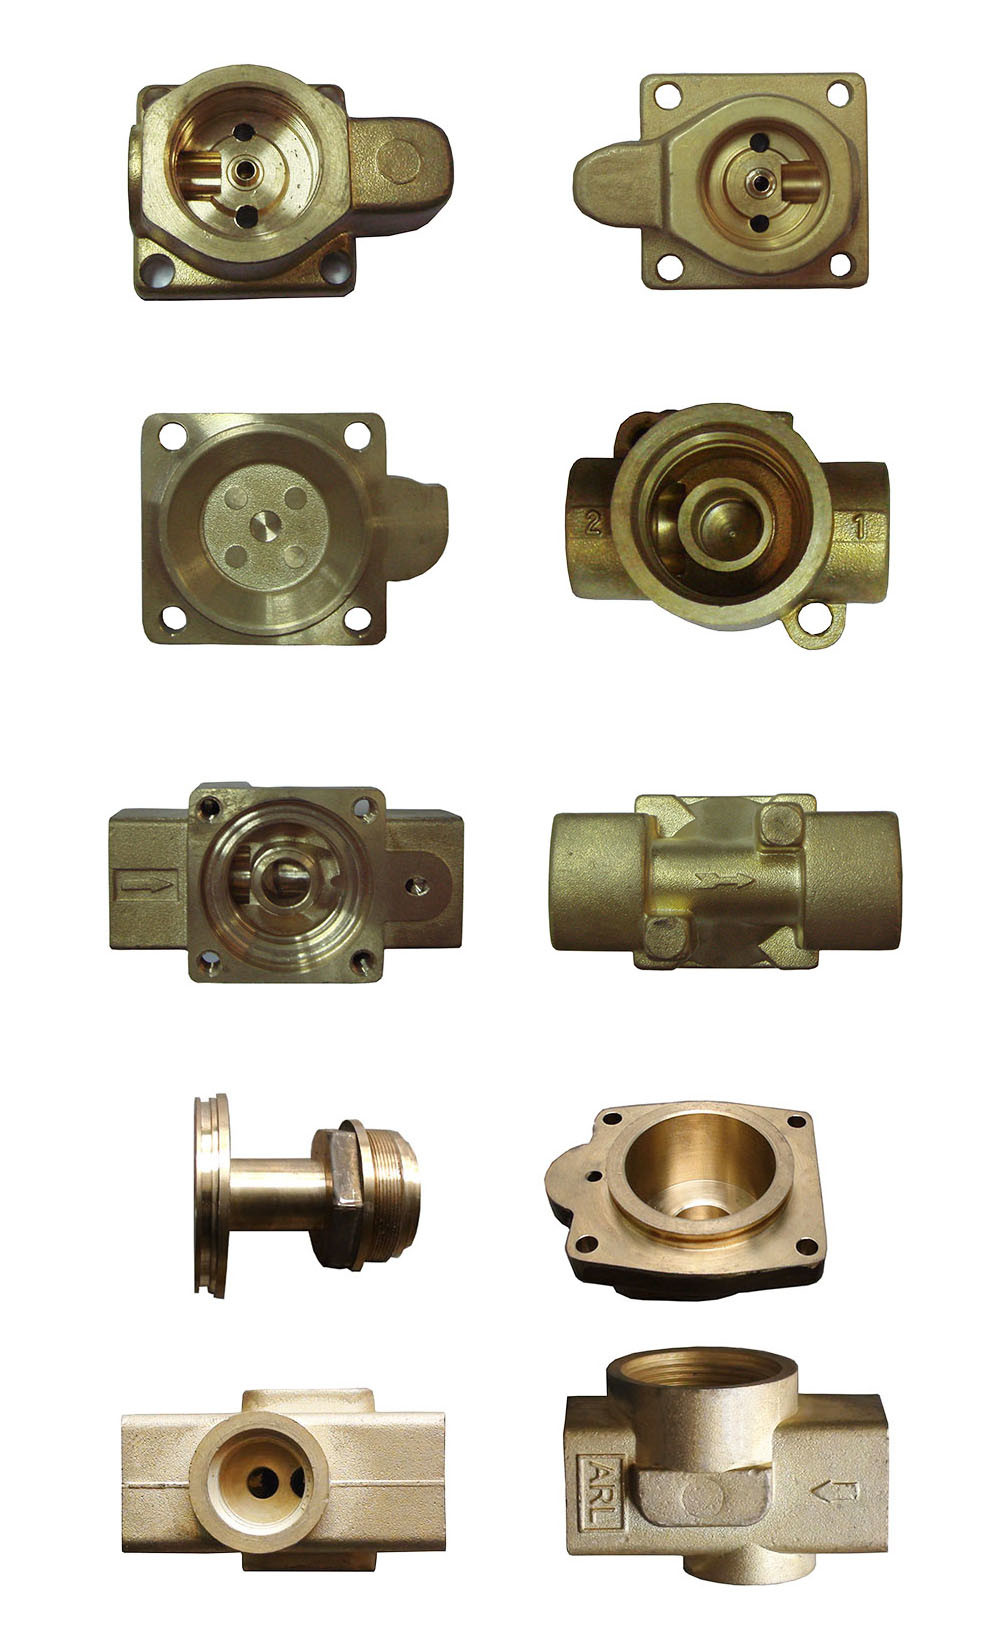 Made of Forged Brass CNC Machined Valve Part